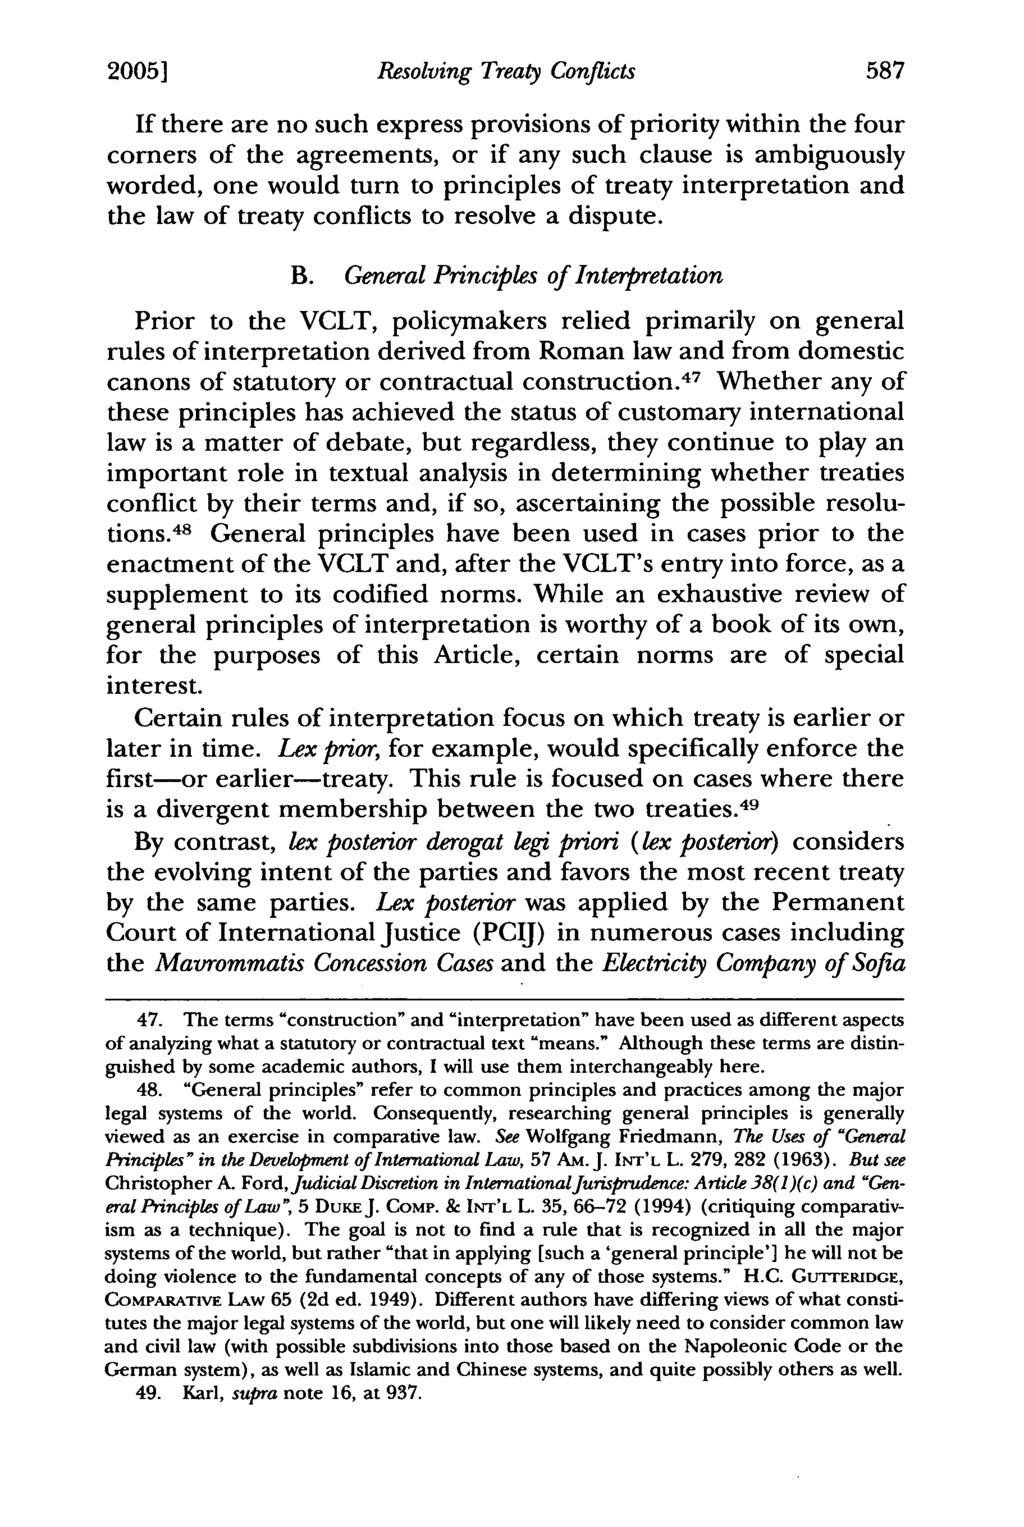 2005] Resolving Treaty Conflicts If there are no such express provisions of priority within the four corners of the agreements, or if any such clause is ambiguously worded, one would turn to